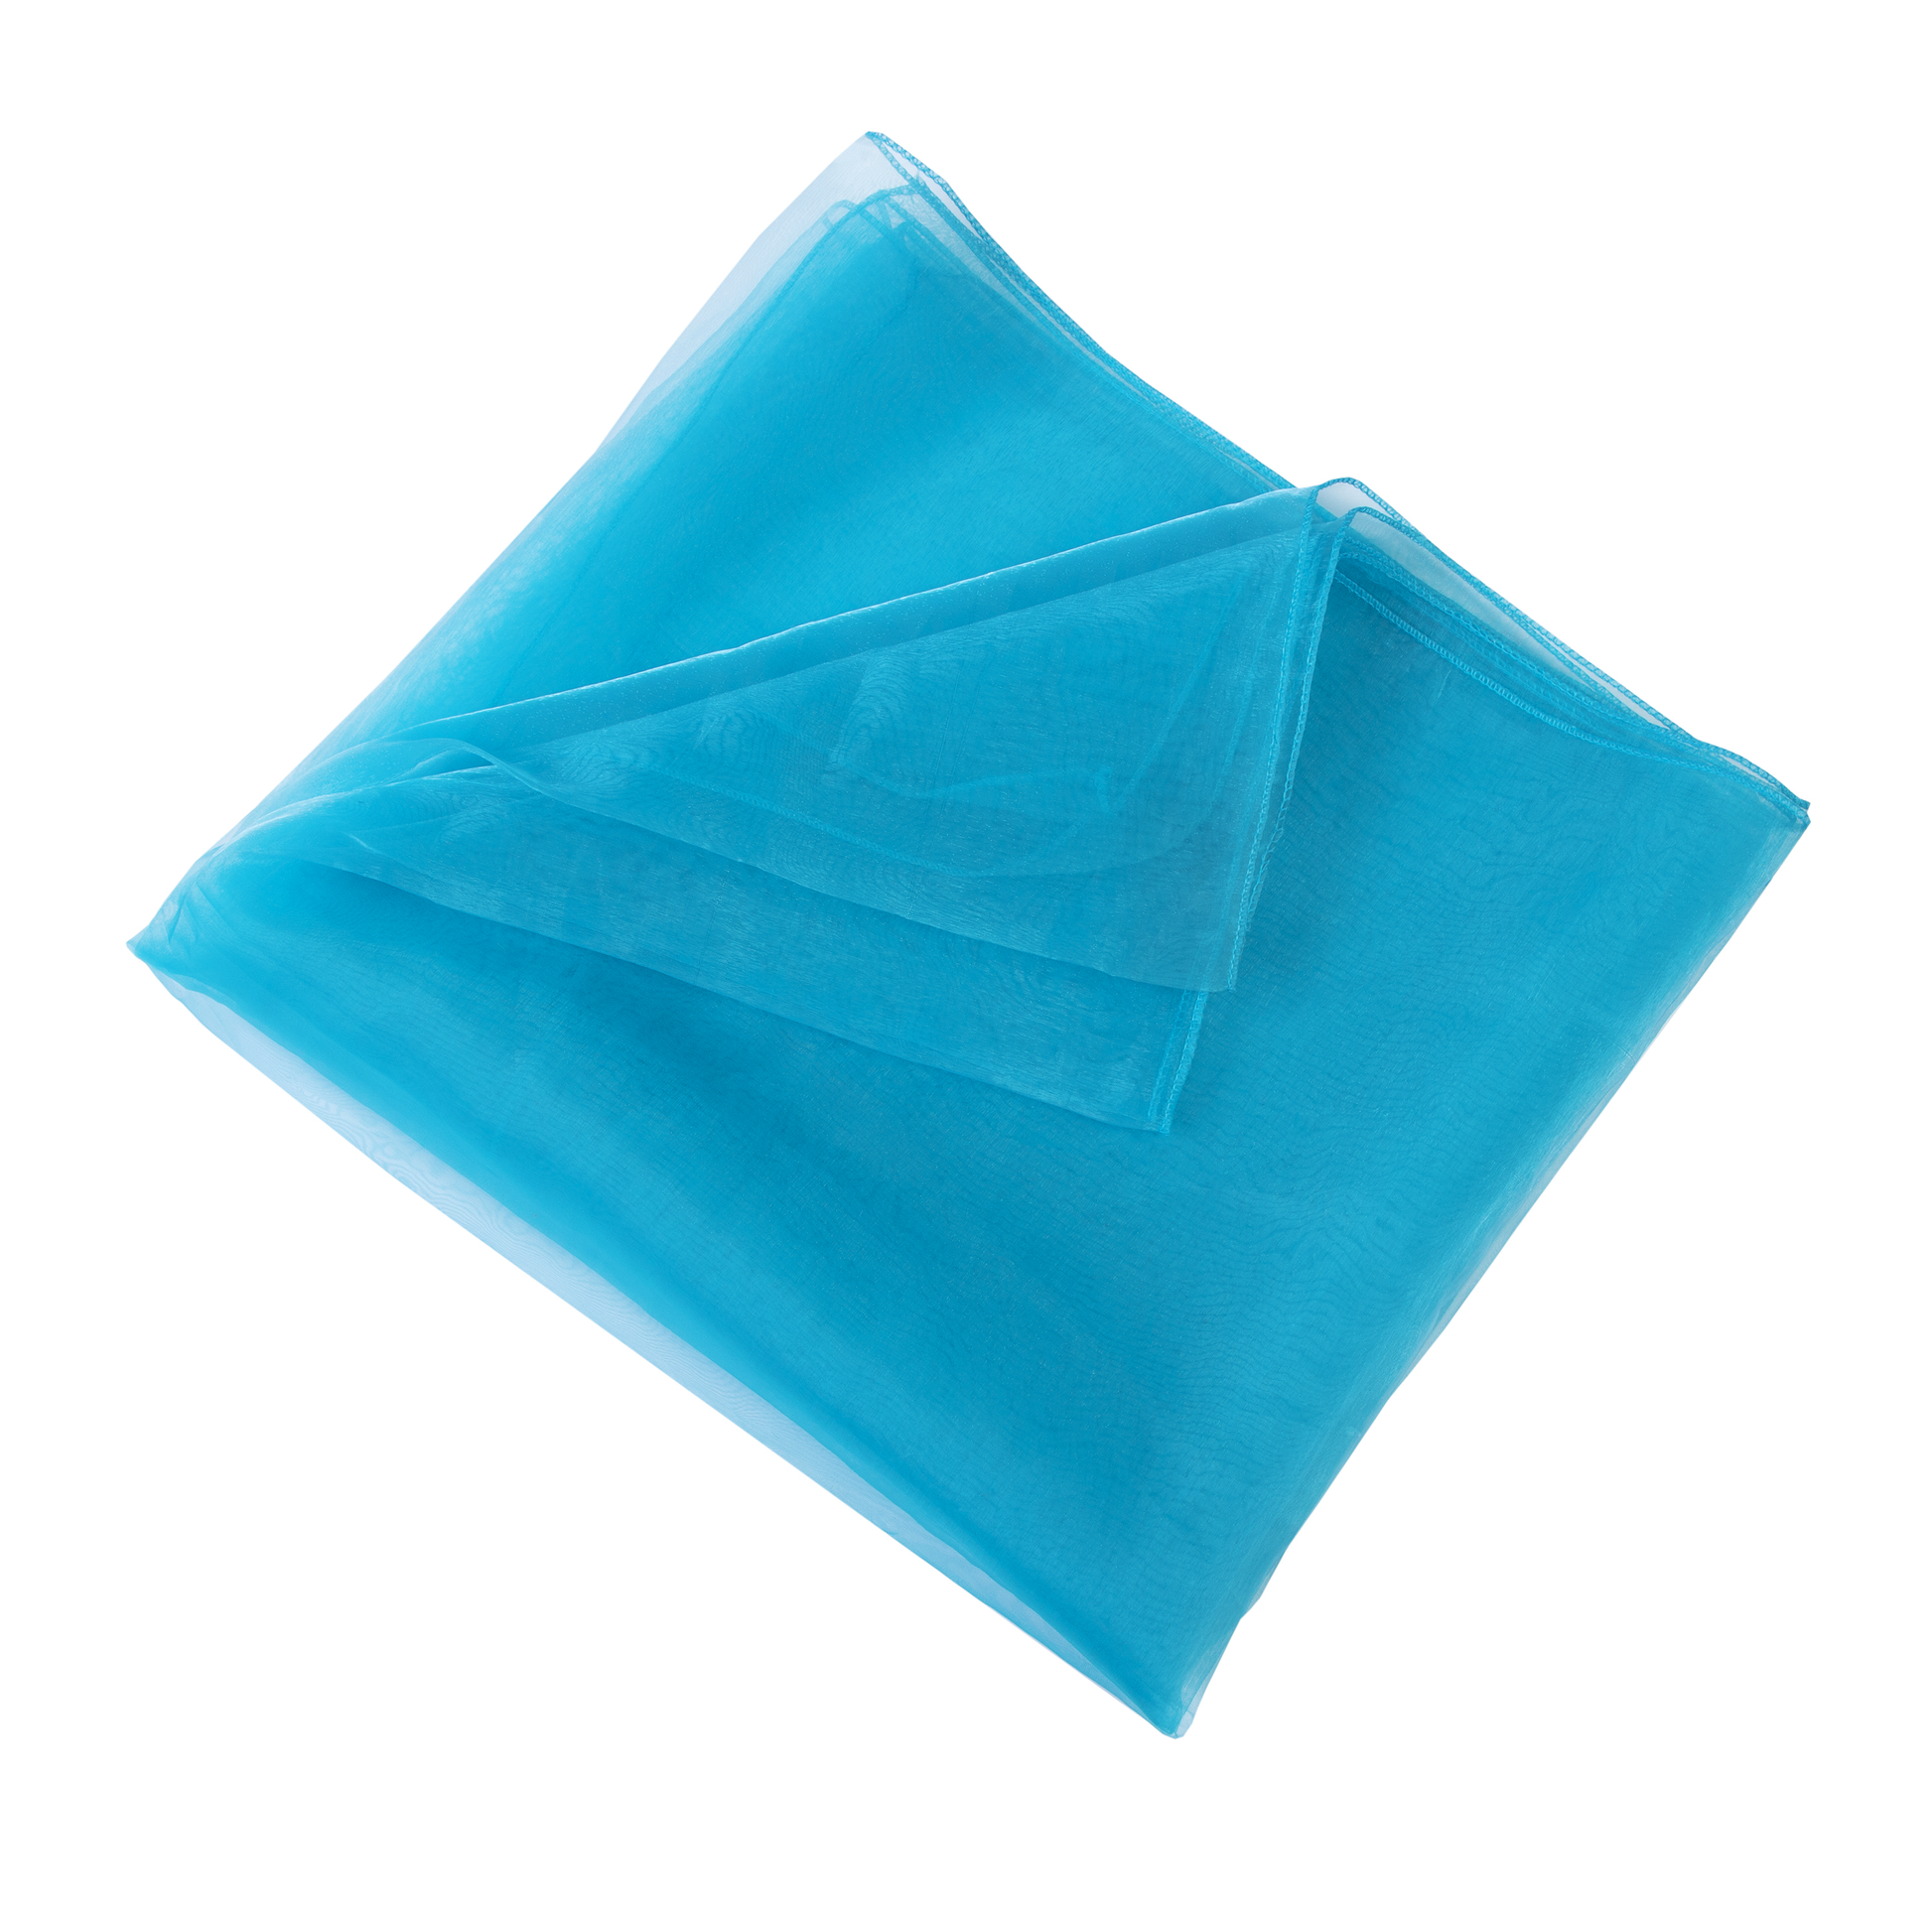 Turquoise,aabe2752-d64e-43f5-876d-0ef90c1dc242.png